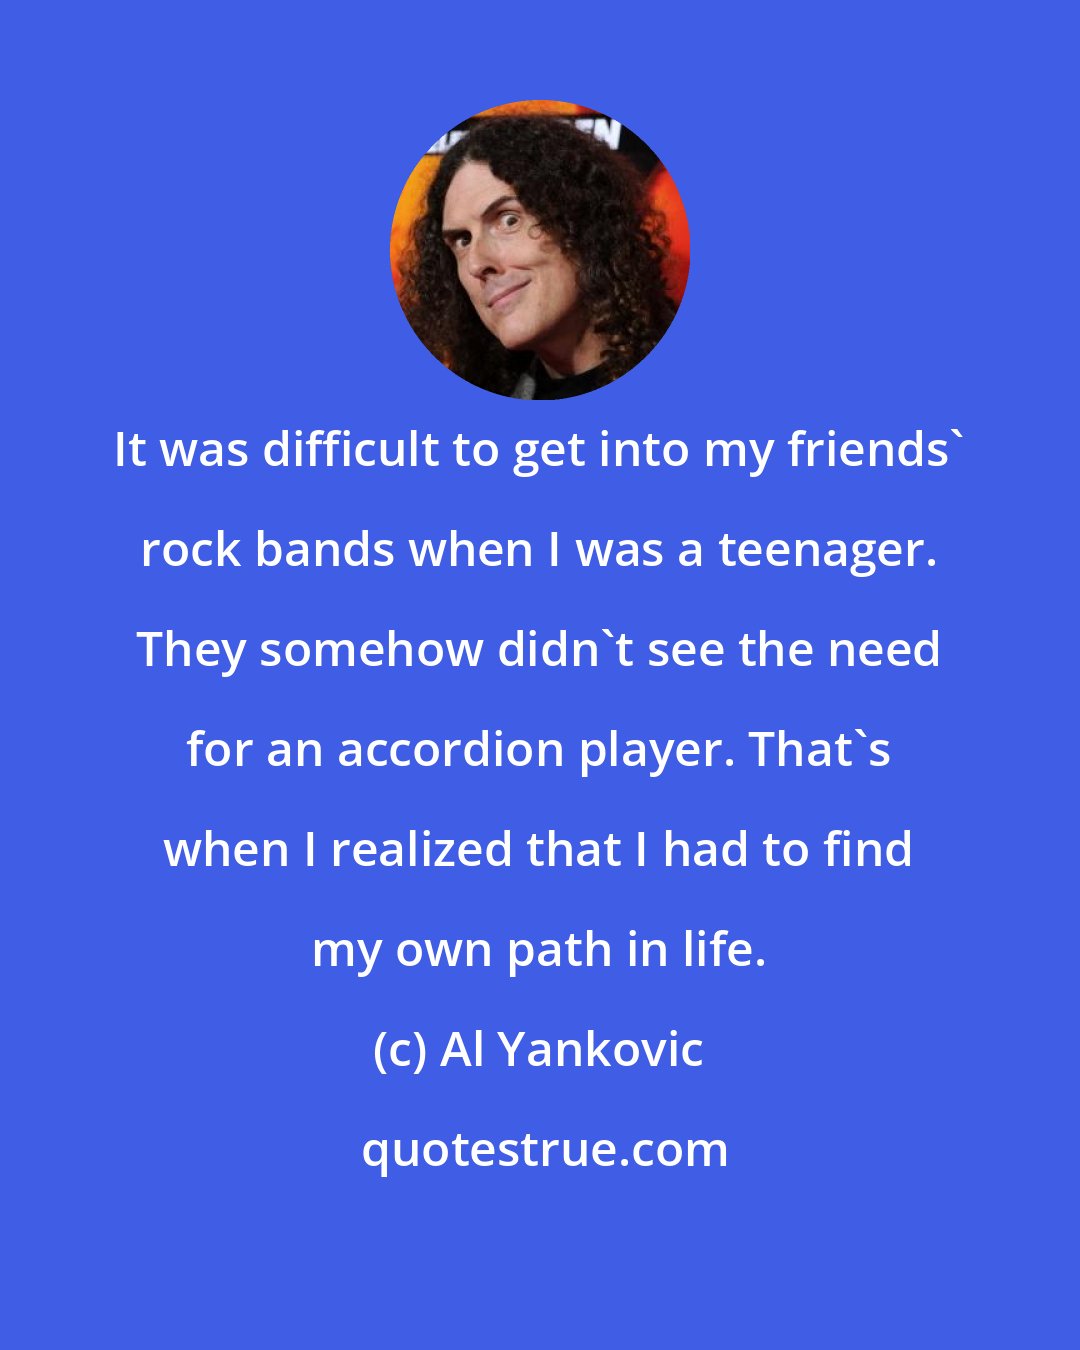 Al Yankovic: It was difficult to get into my friends' rock bands when I was a teenager. They somehow didn't see the need for an accordion player. That's when I realized that I had to find my own path in life.